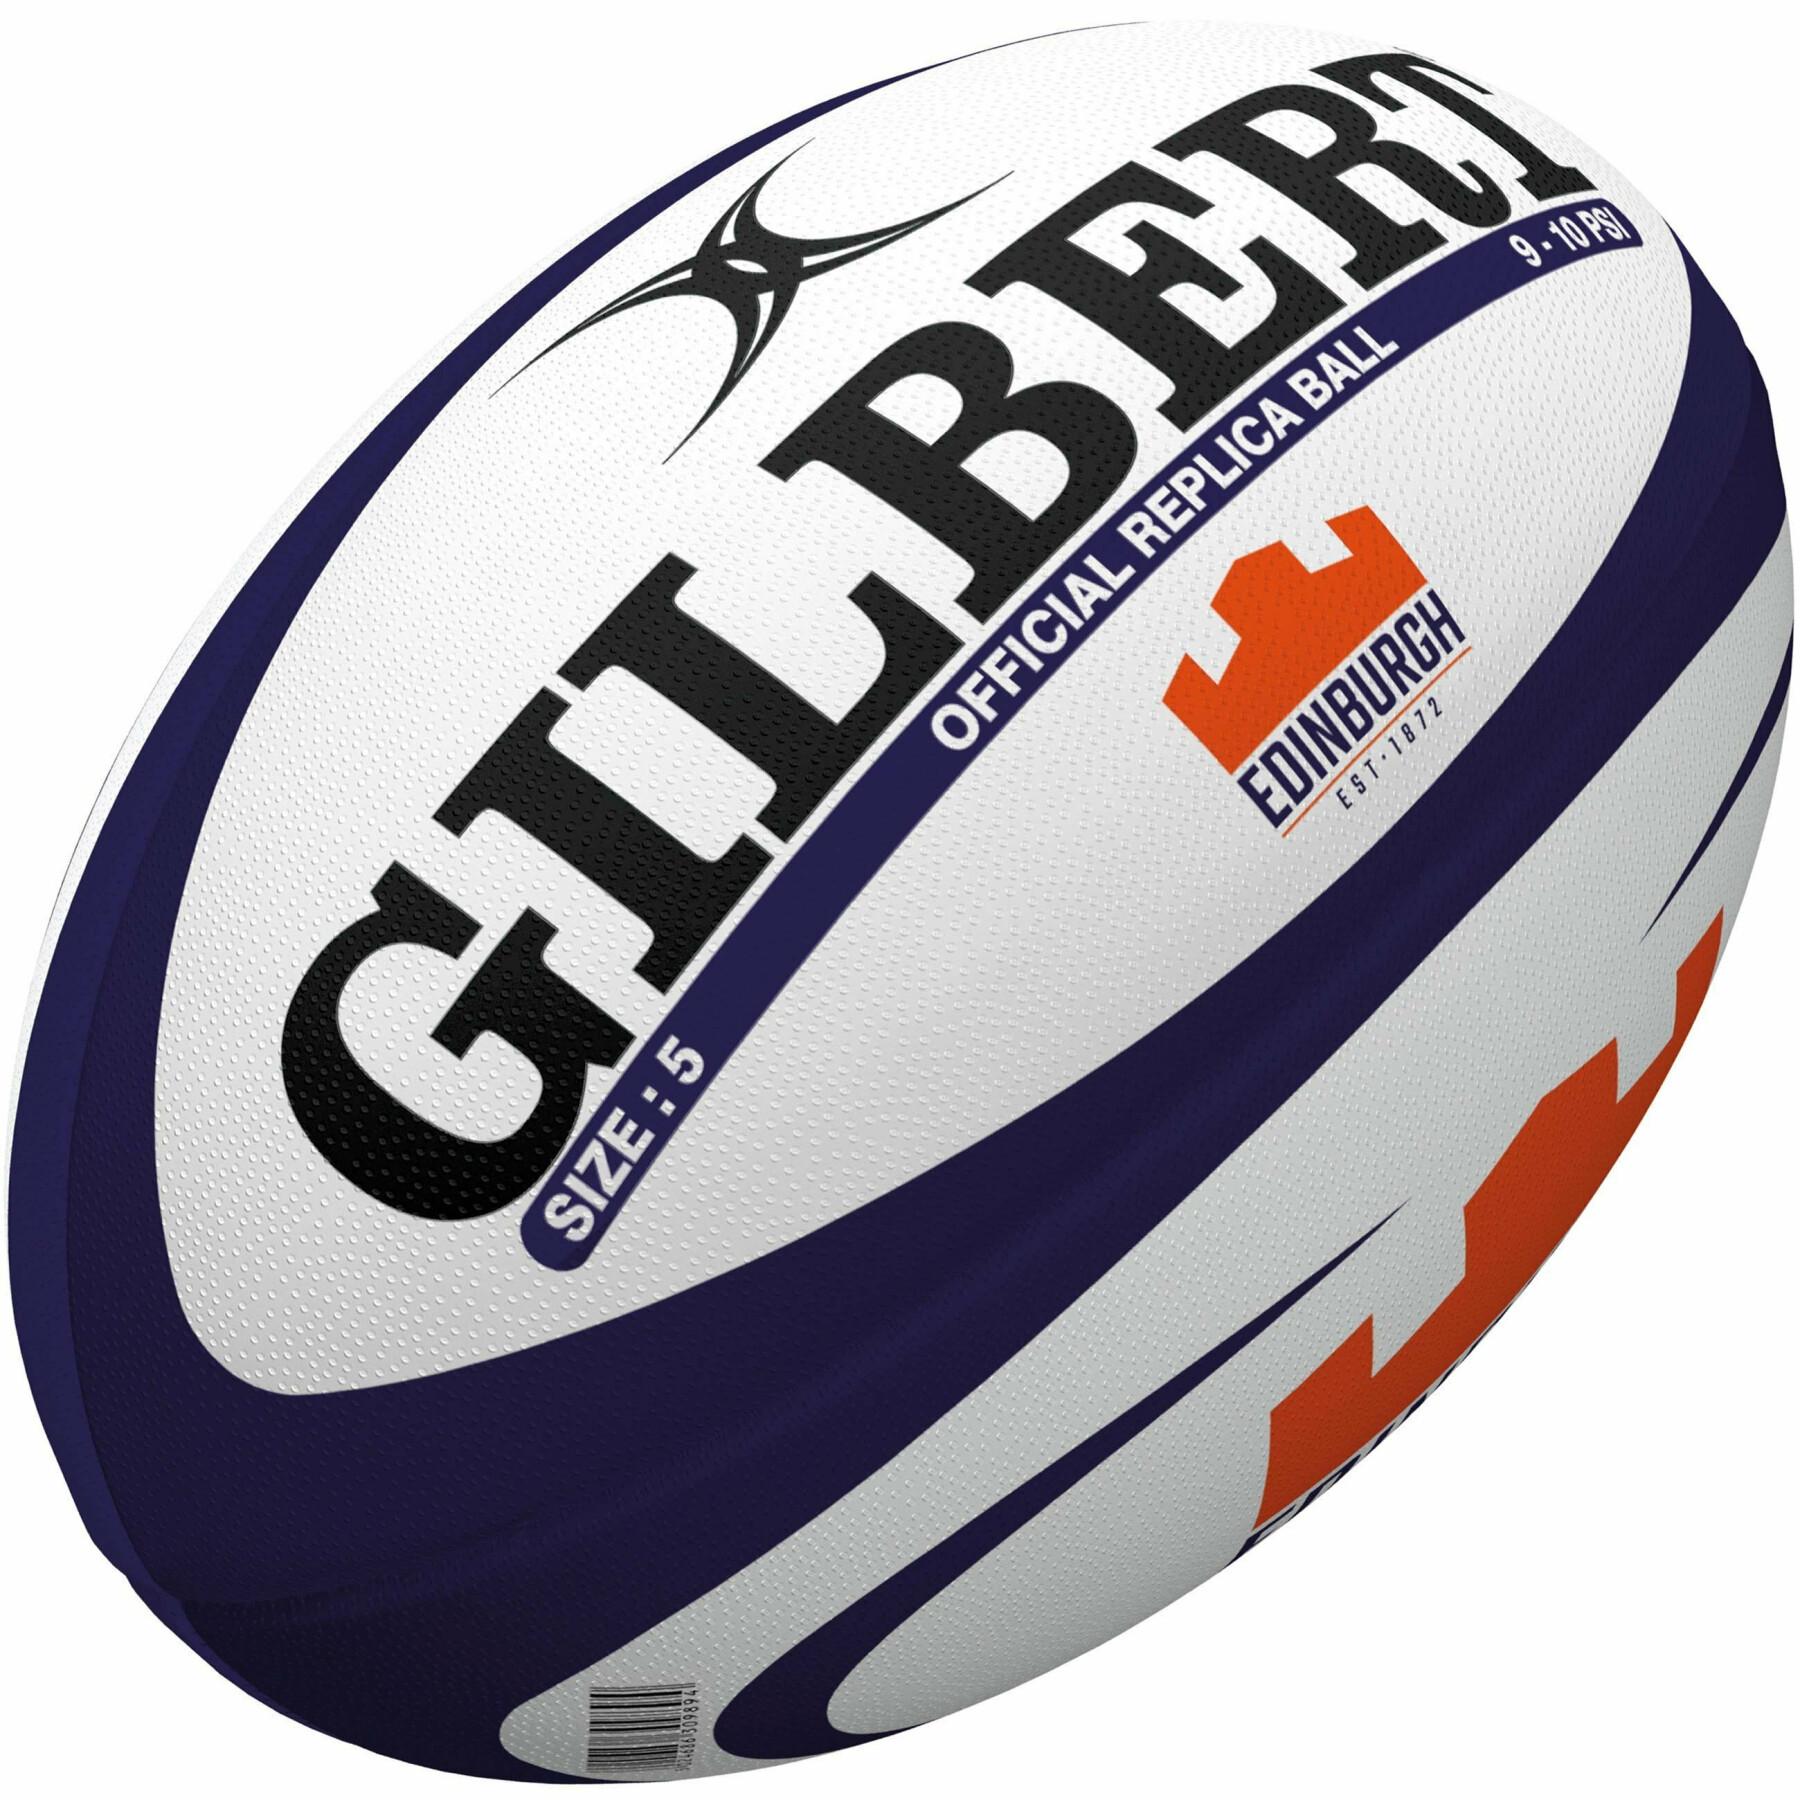 Rugbyball Édimbourg Rugby 2021/22